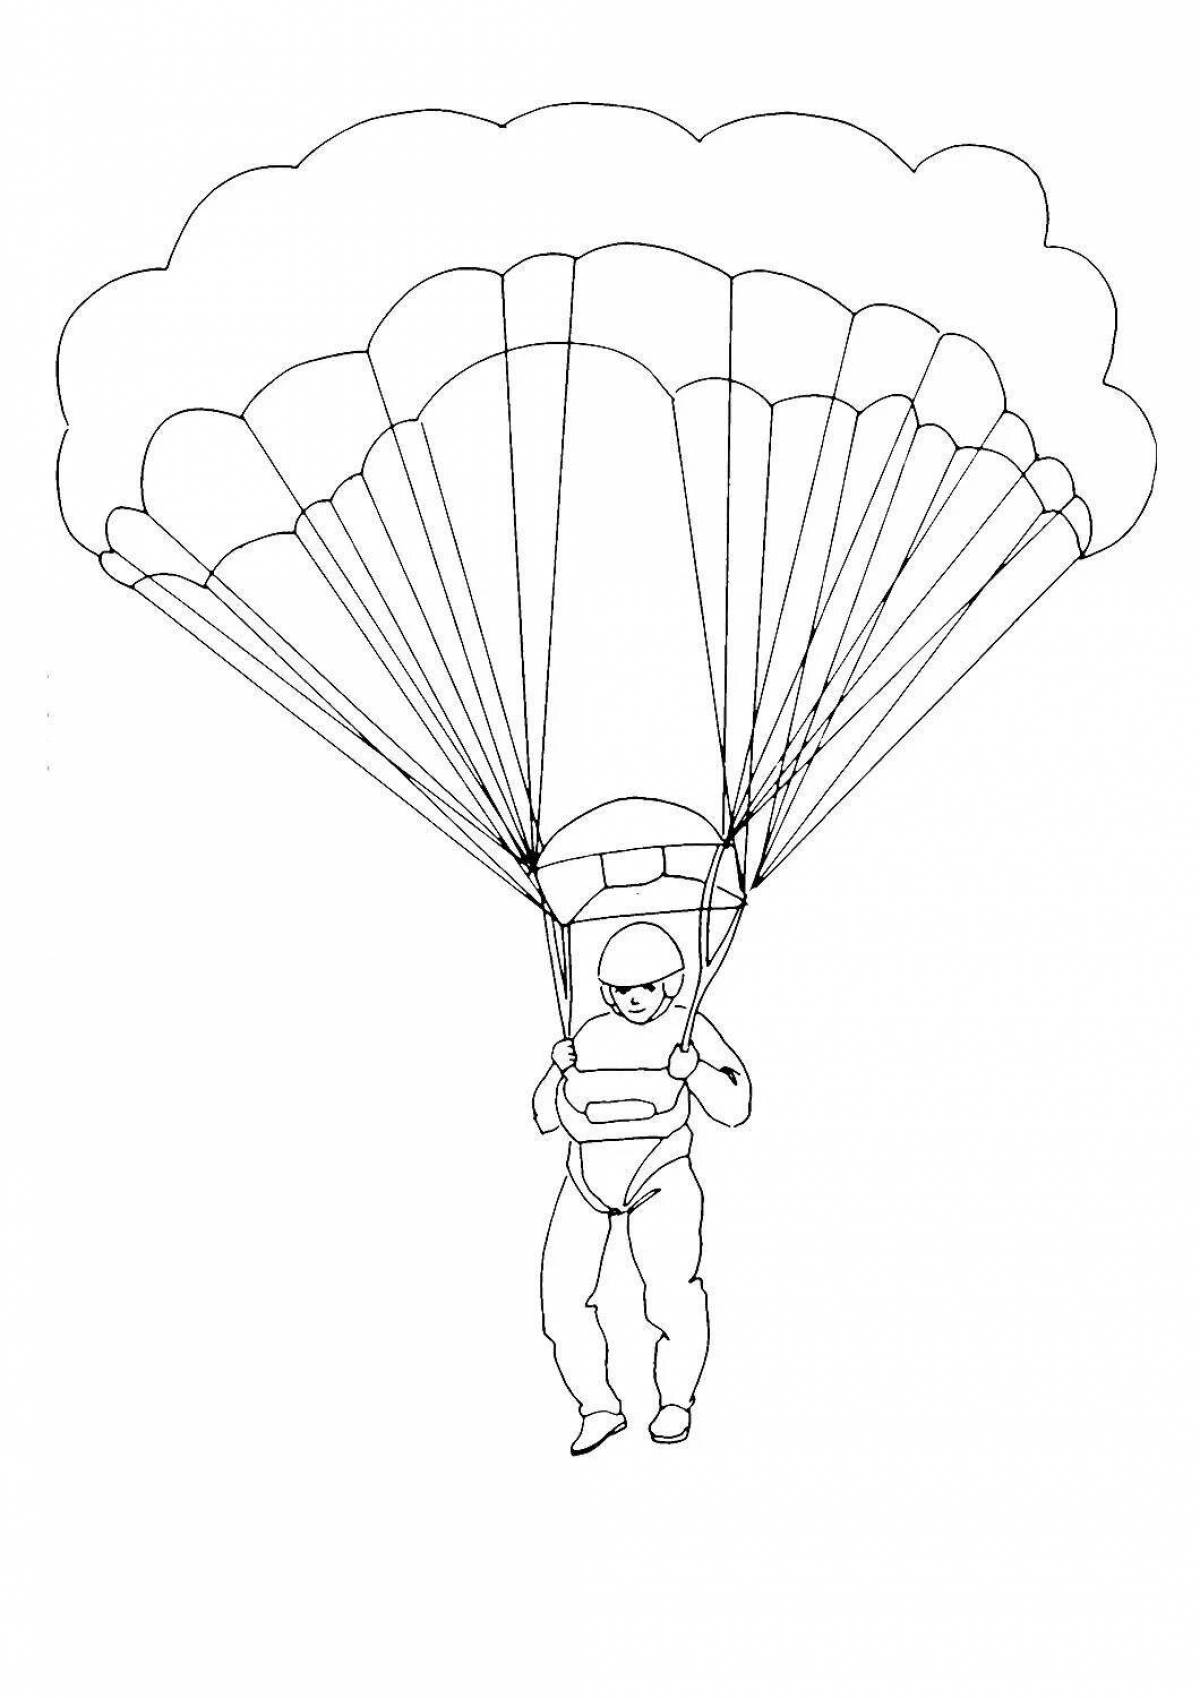 Coloring paratrooper for the little ones